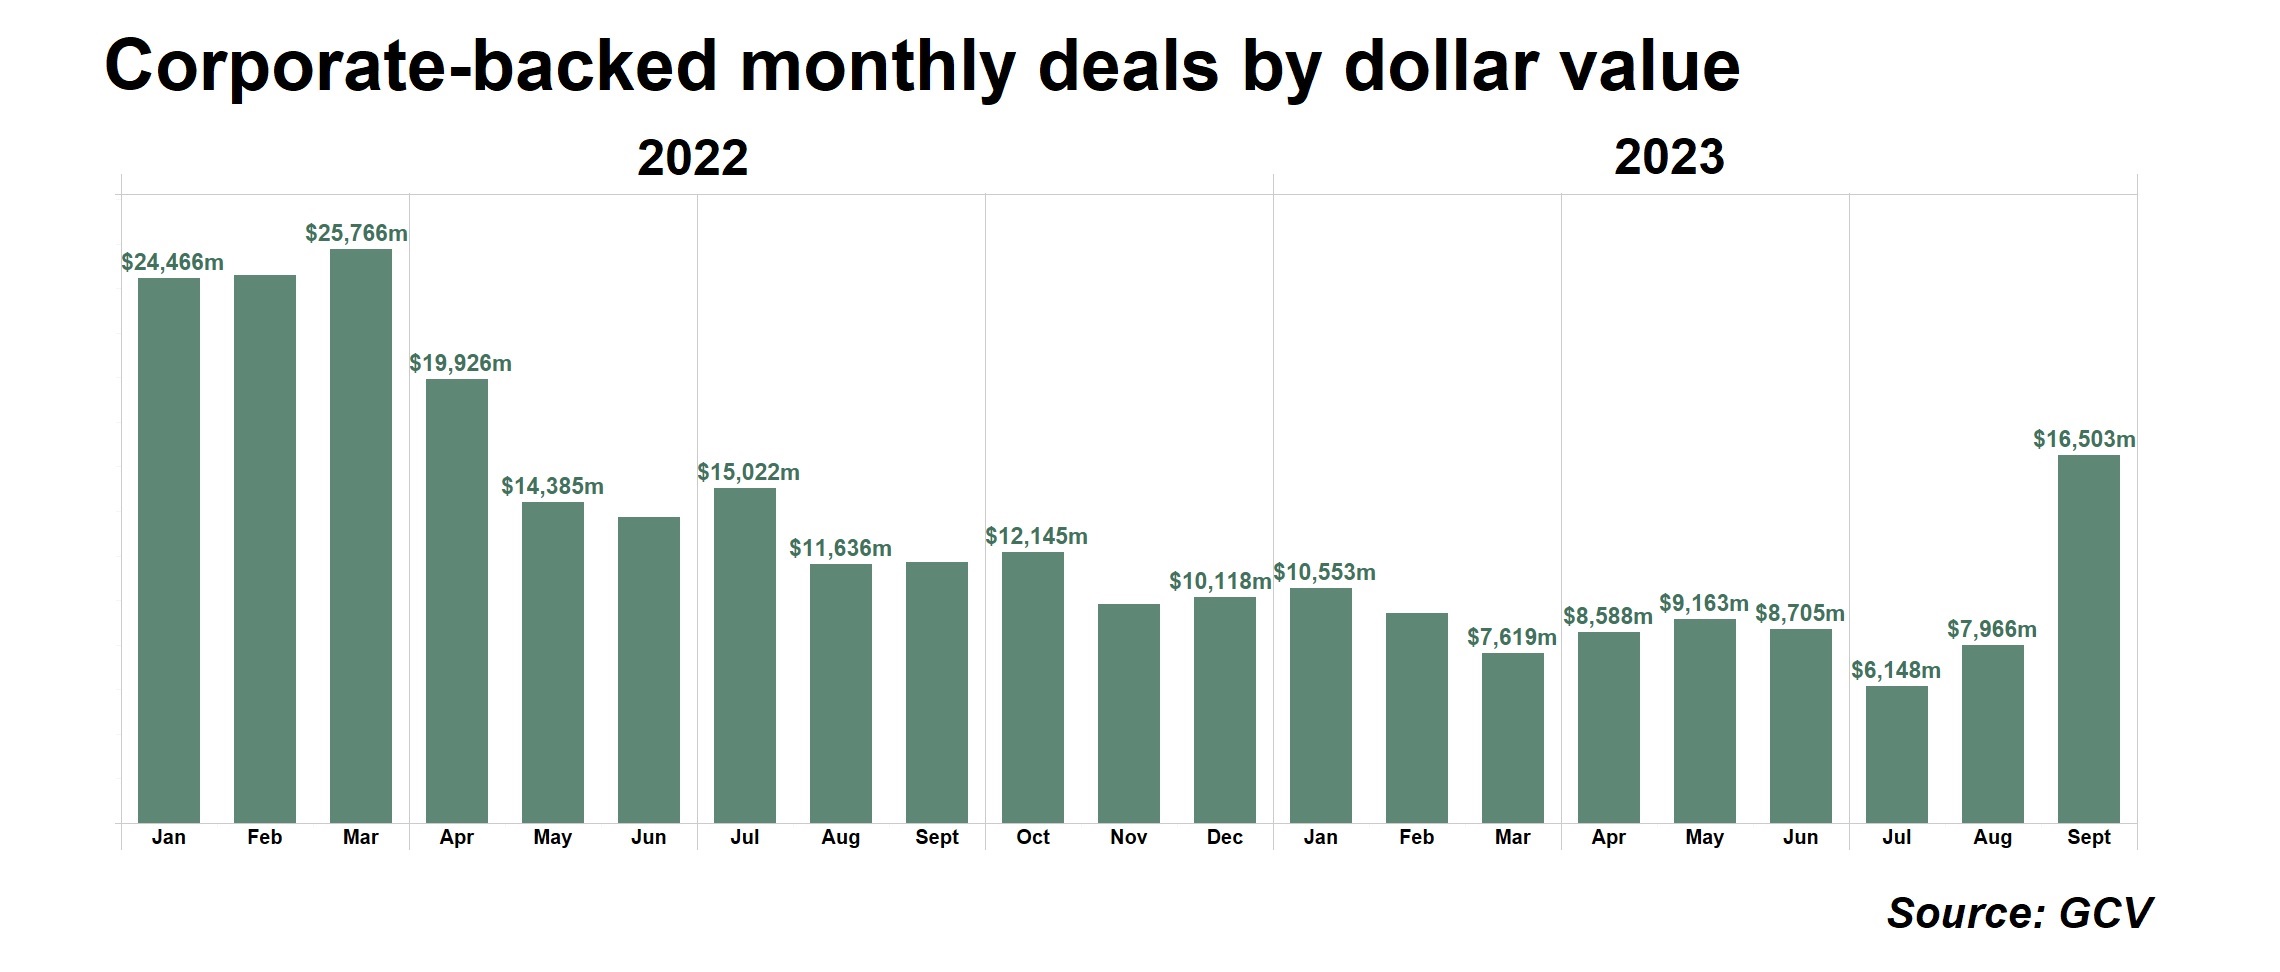 Bar chart showing corporate-backed monthly deals by dollar value 2022-23. Source: GCV